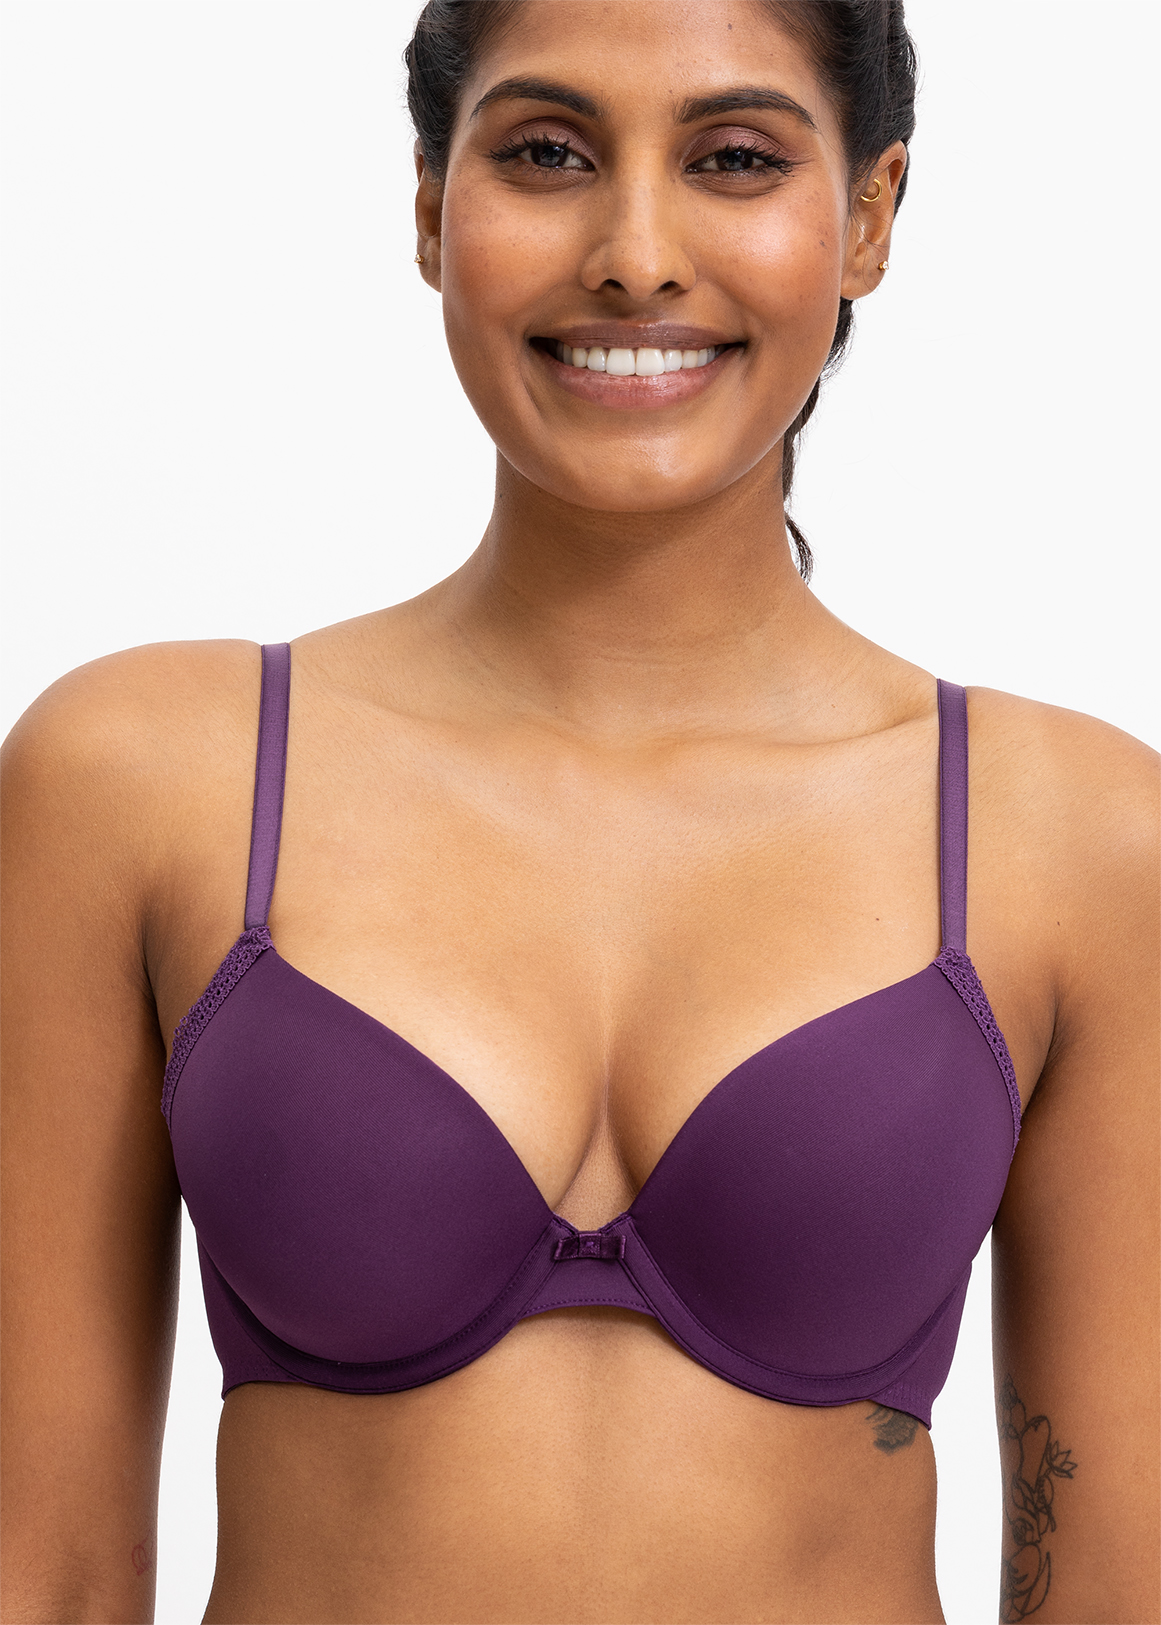 Padded Underwire Plunge T-shirt Bras 2 Pack